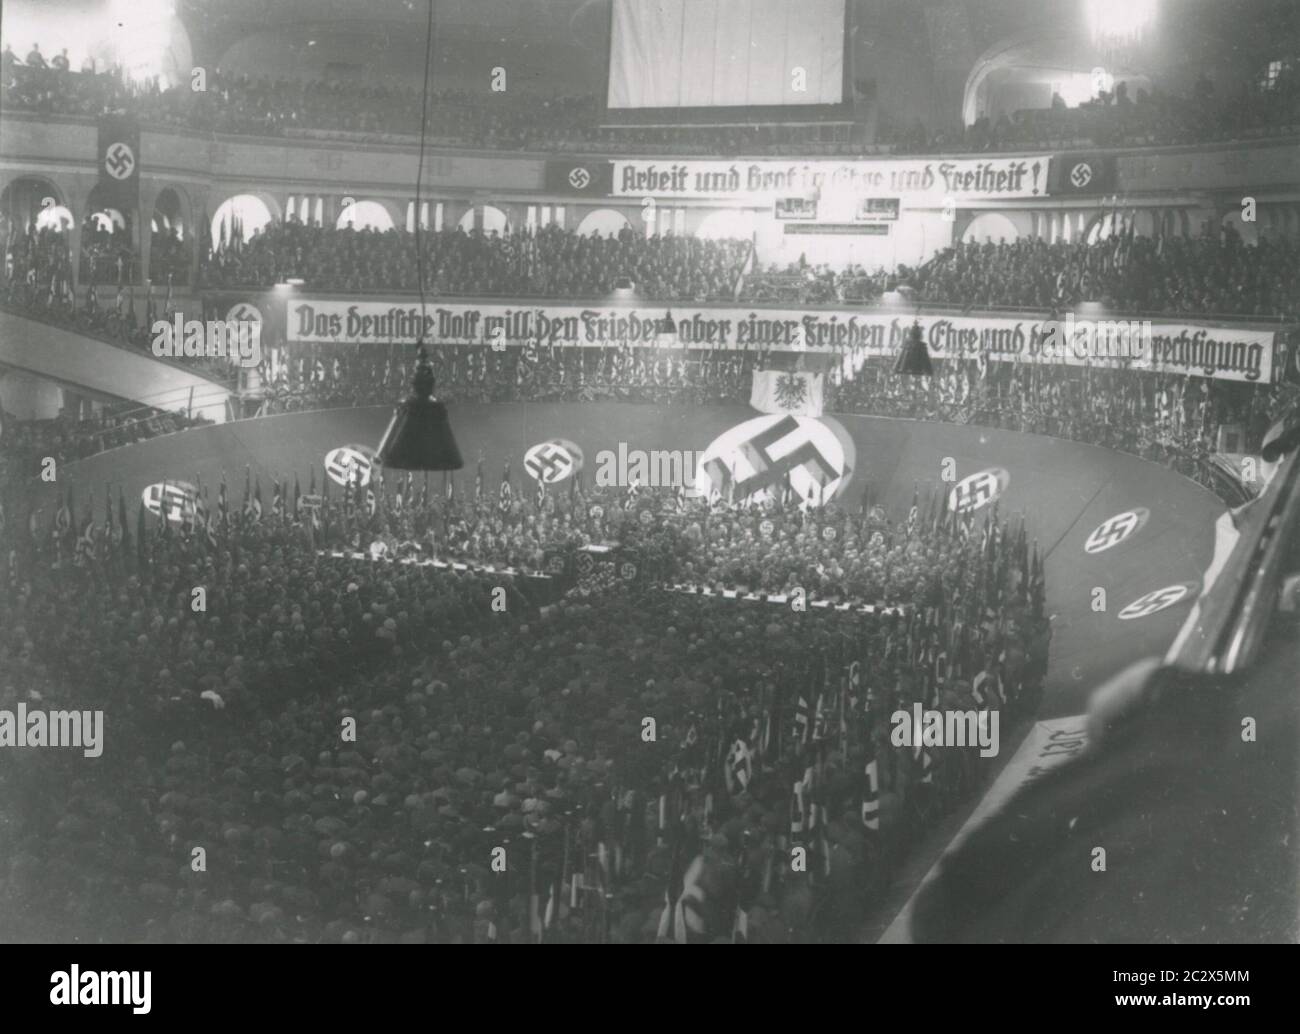 Rally in the Berlin Sportpalast Heinrich Hoffmann Photographs 1933 Adolf Hitler's official photographer, and a Nazi politician and publisher, who was a member of Hitler's intimate circle. Stock Photo